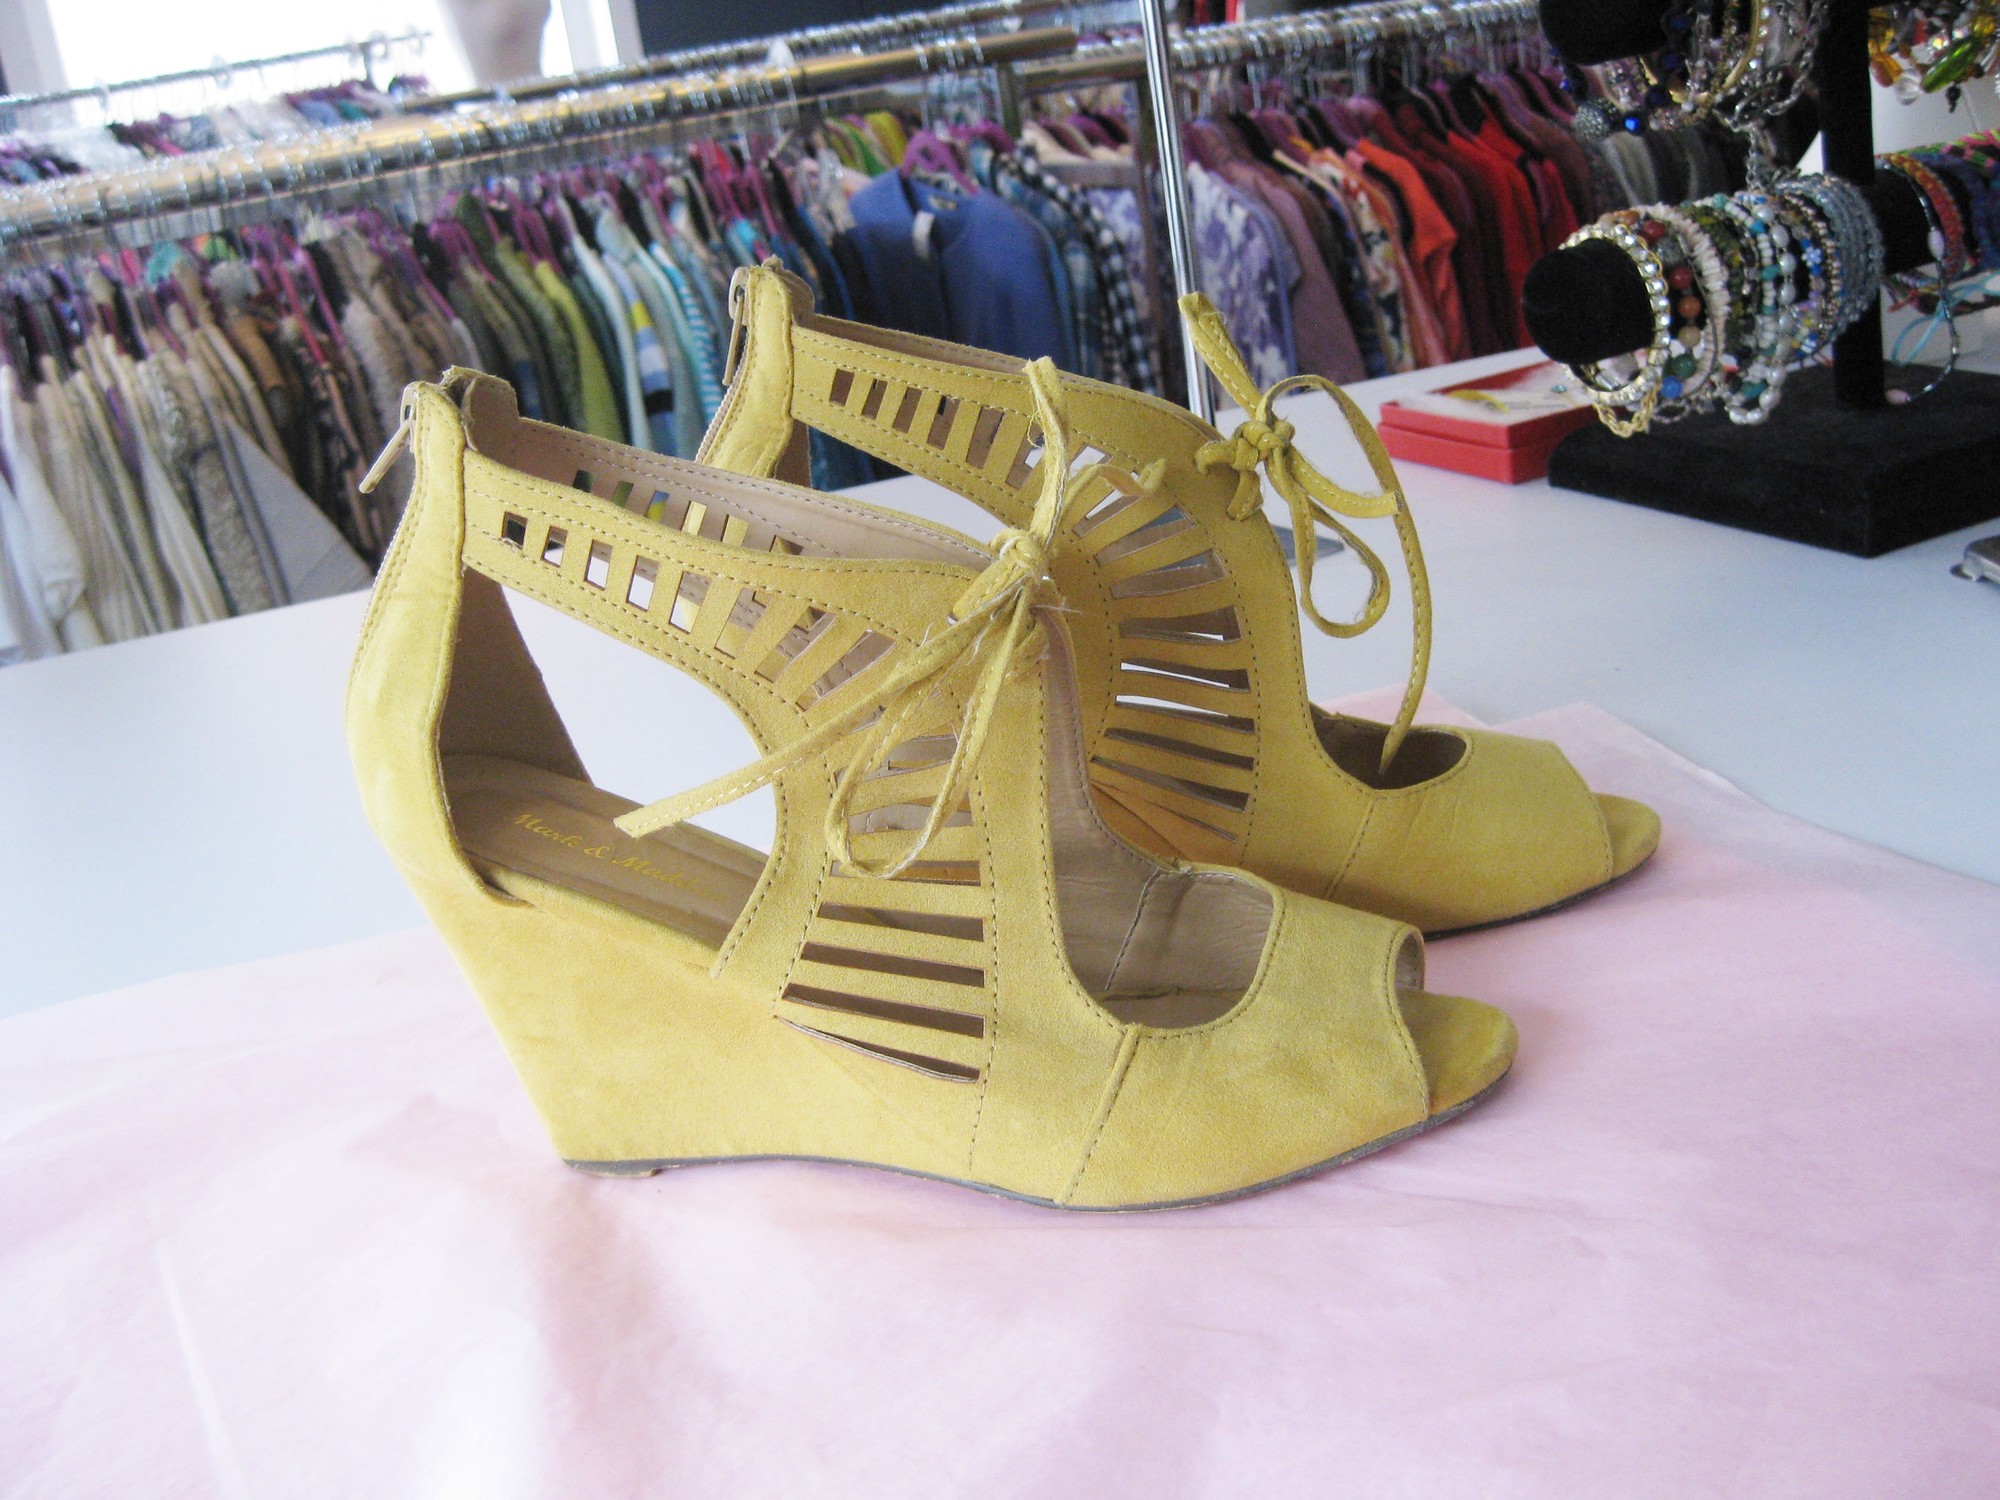 These are so cute and a great color.
Mark & Maddox Faux Suede wedge with cutouts and laces across the top
in a soft marigold yellow
Zippers in the back.
size 8.5
relatively comfortable wedge heel measures 3.5in
used but excellent condition

thanks for looking
#36331